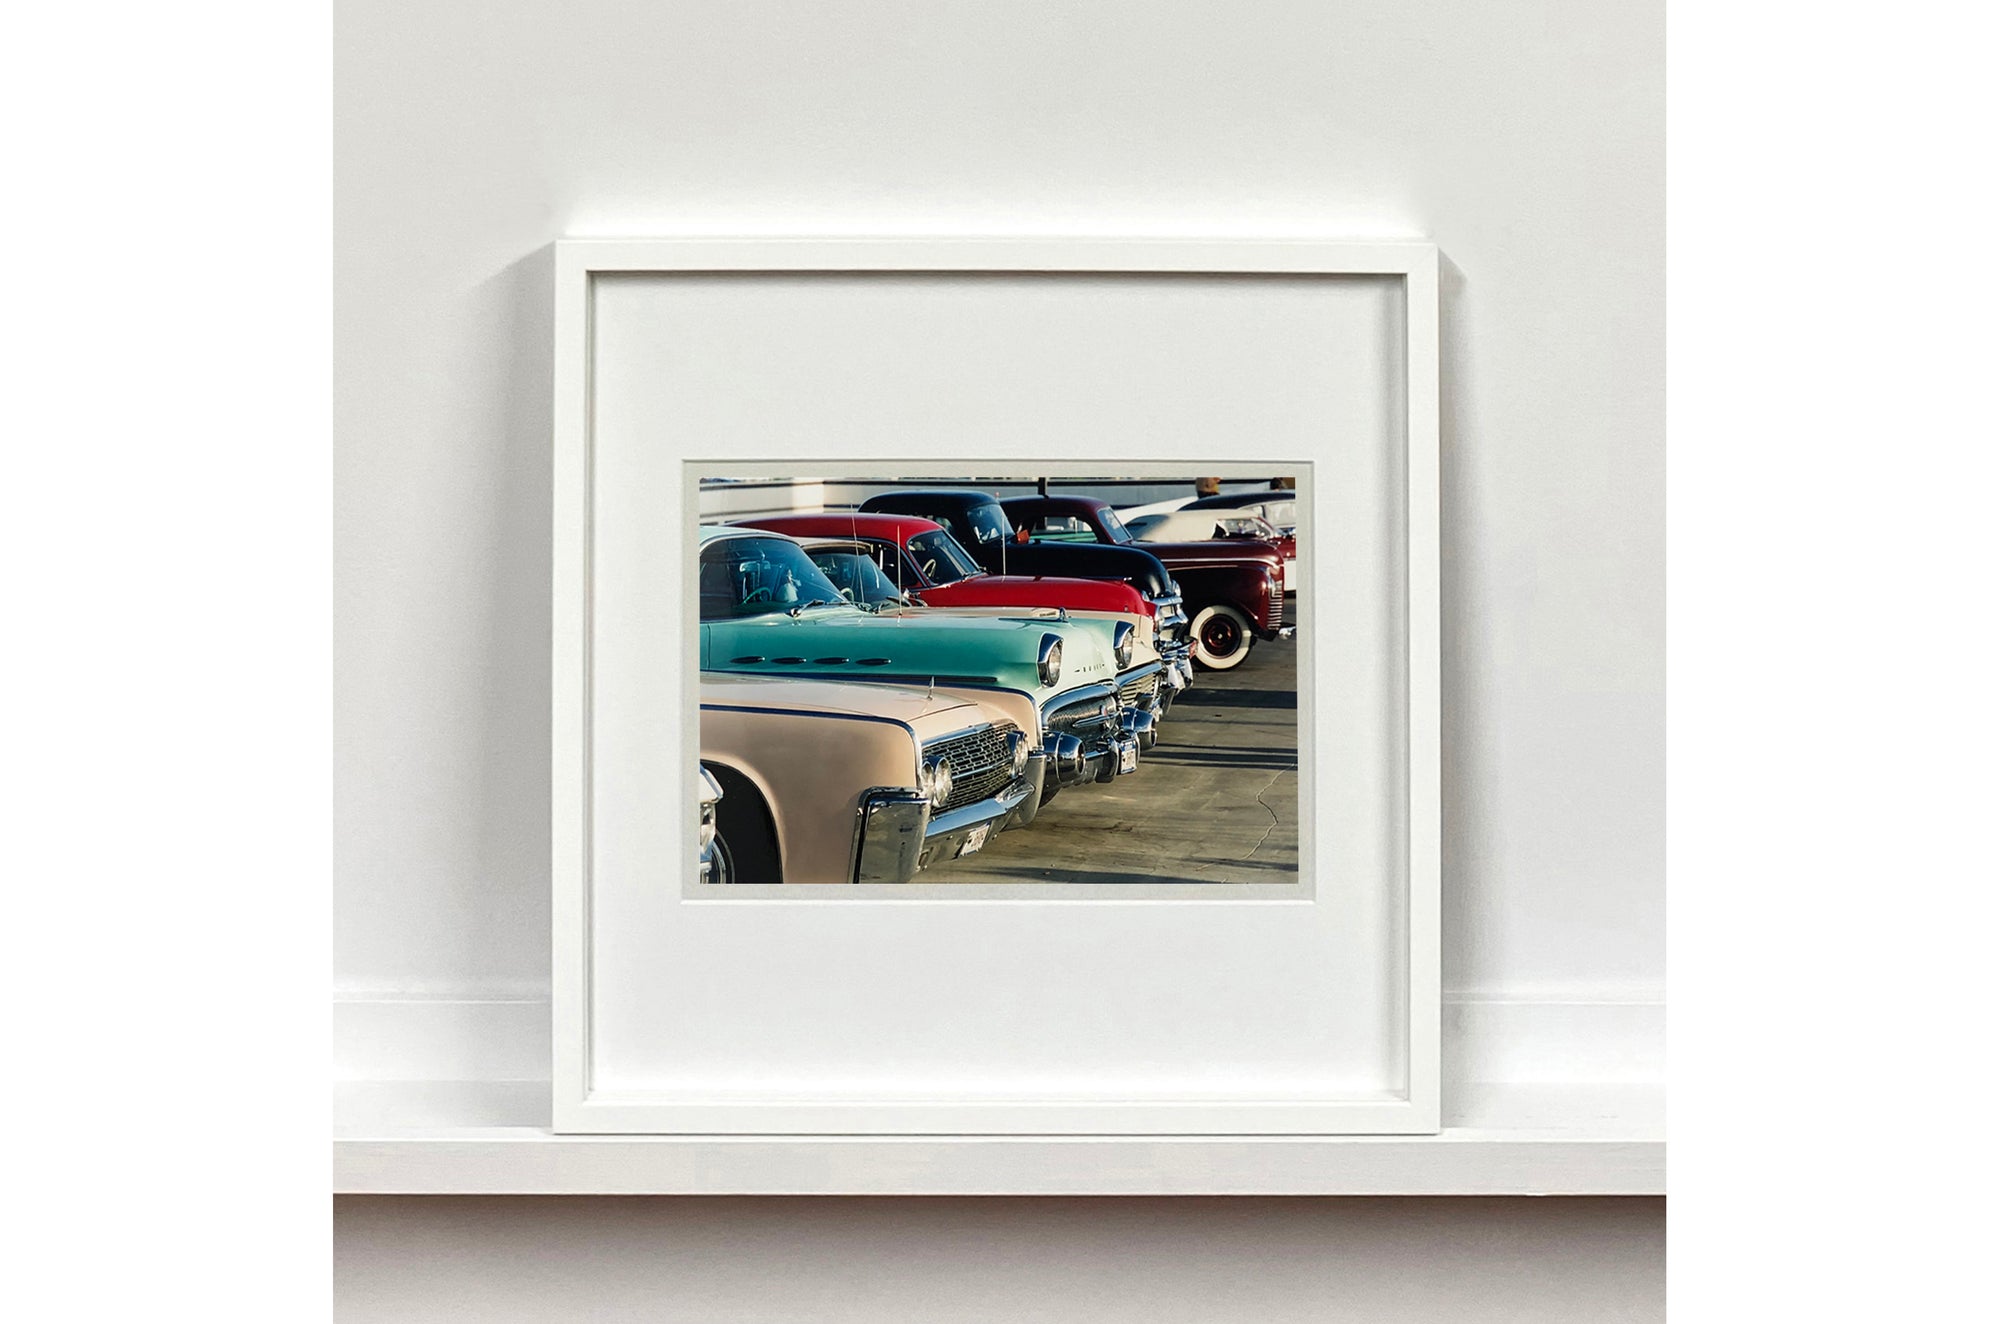 'Cars' taken by Richard Heeps. This artwork is part of his 'Man's Ruin' series.